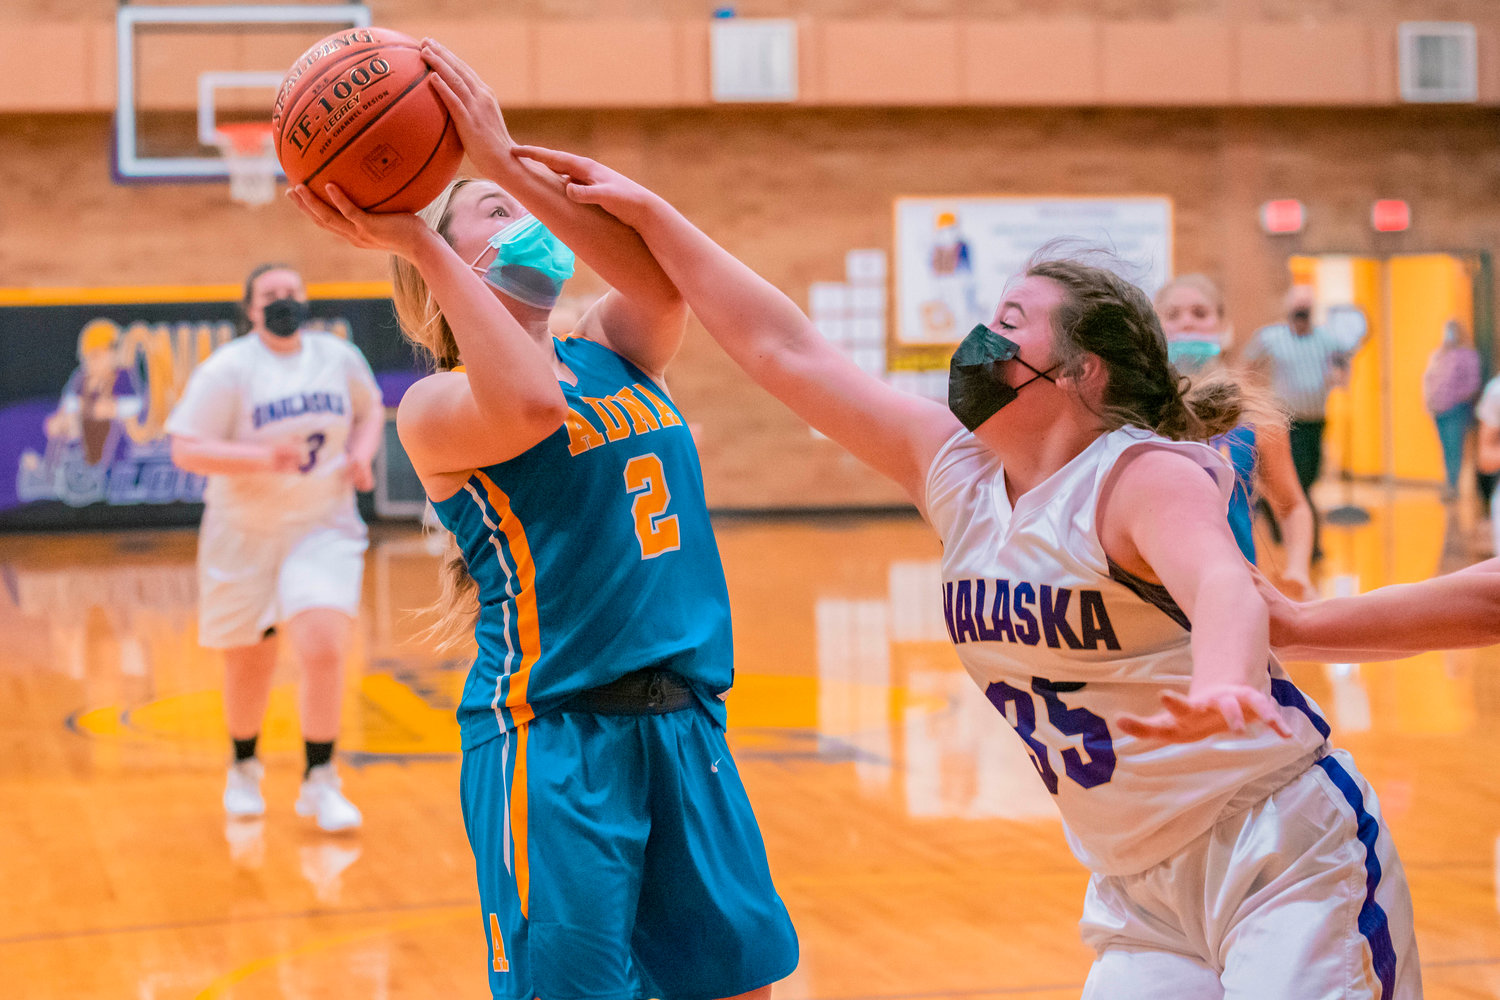 Adna’s Summer White (2) is fouled while shooting during a game against Onalaska on Thursday.